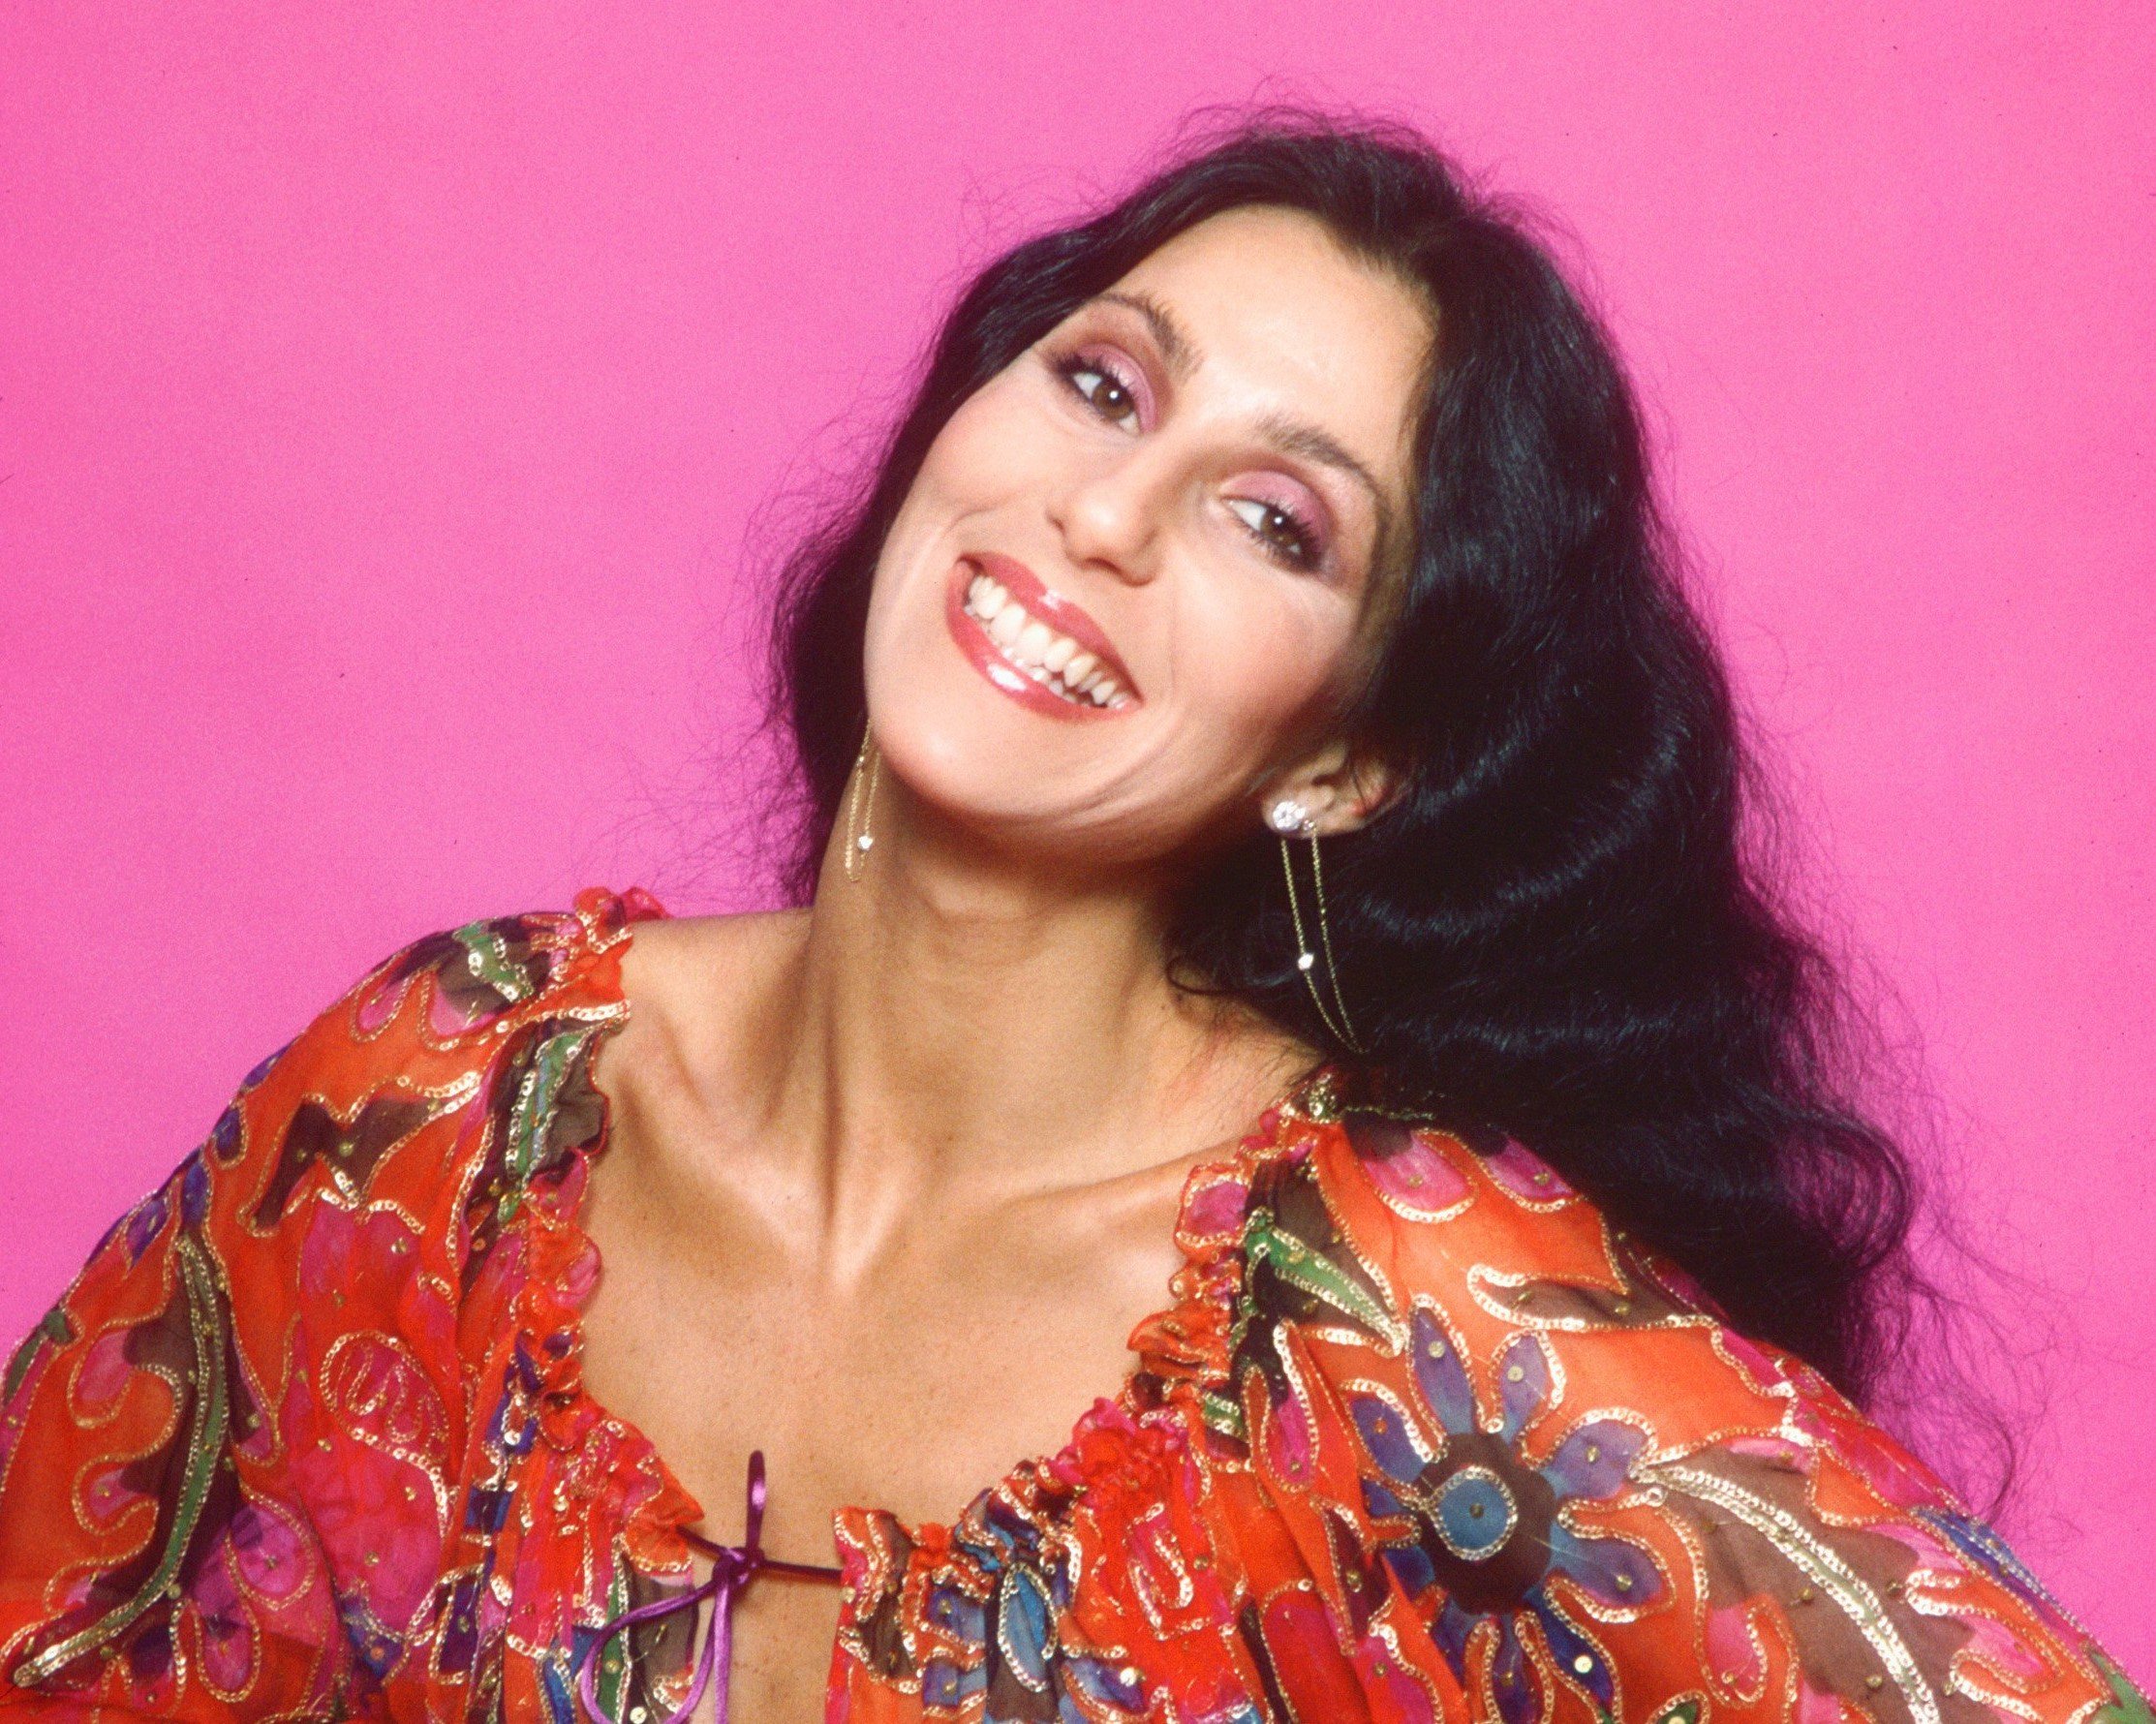 Cher wears a red floral shirt and stands in front of a pink background.